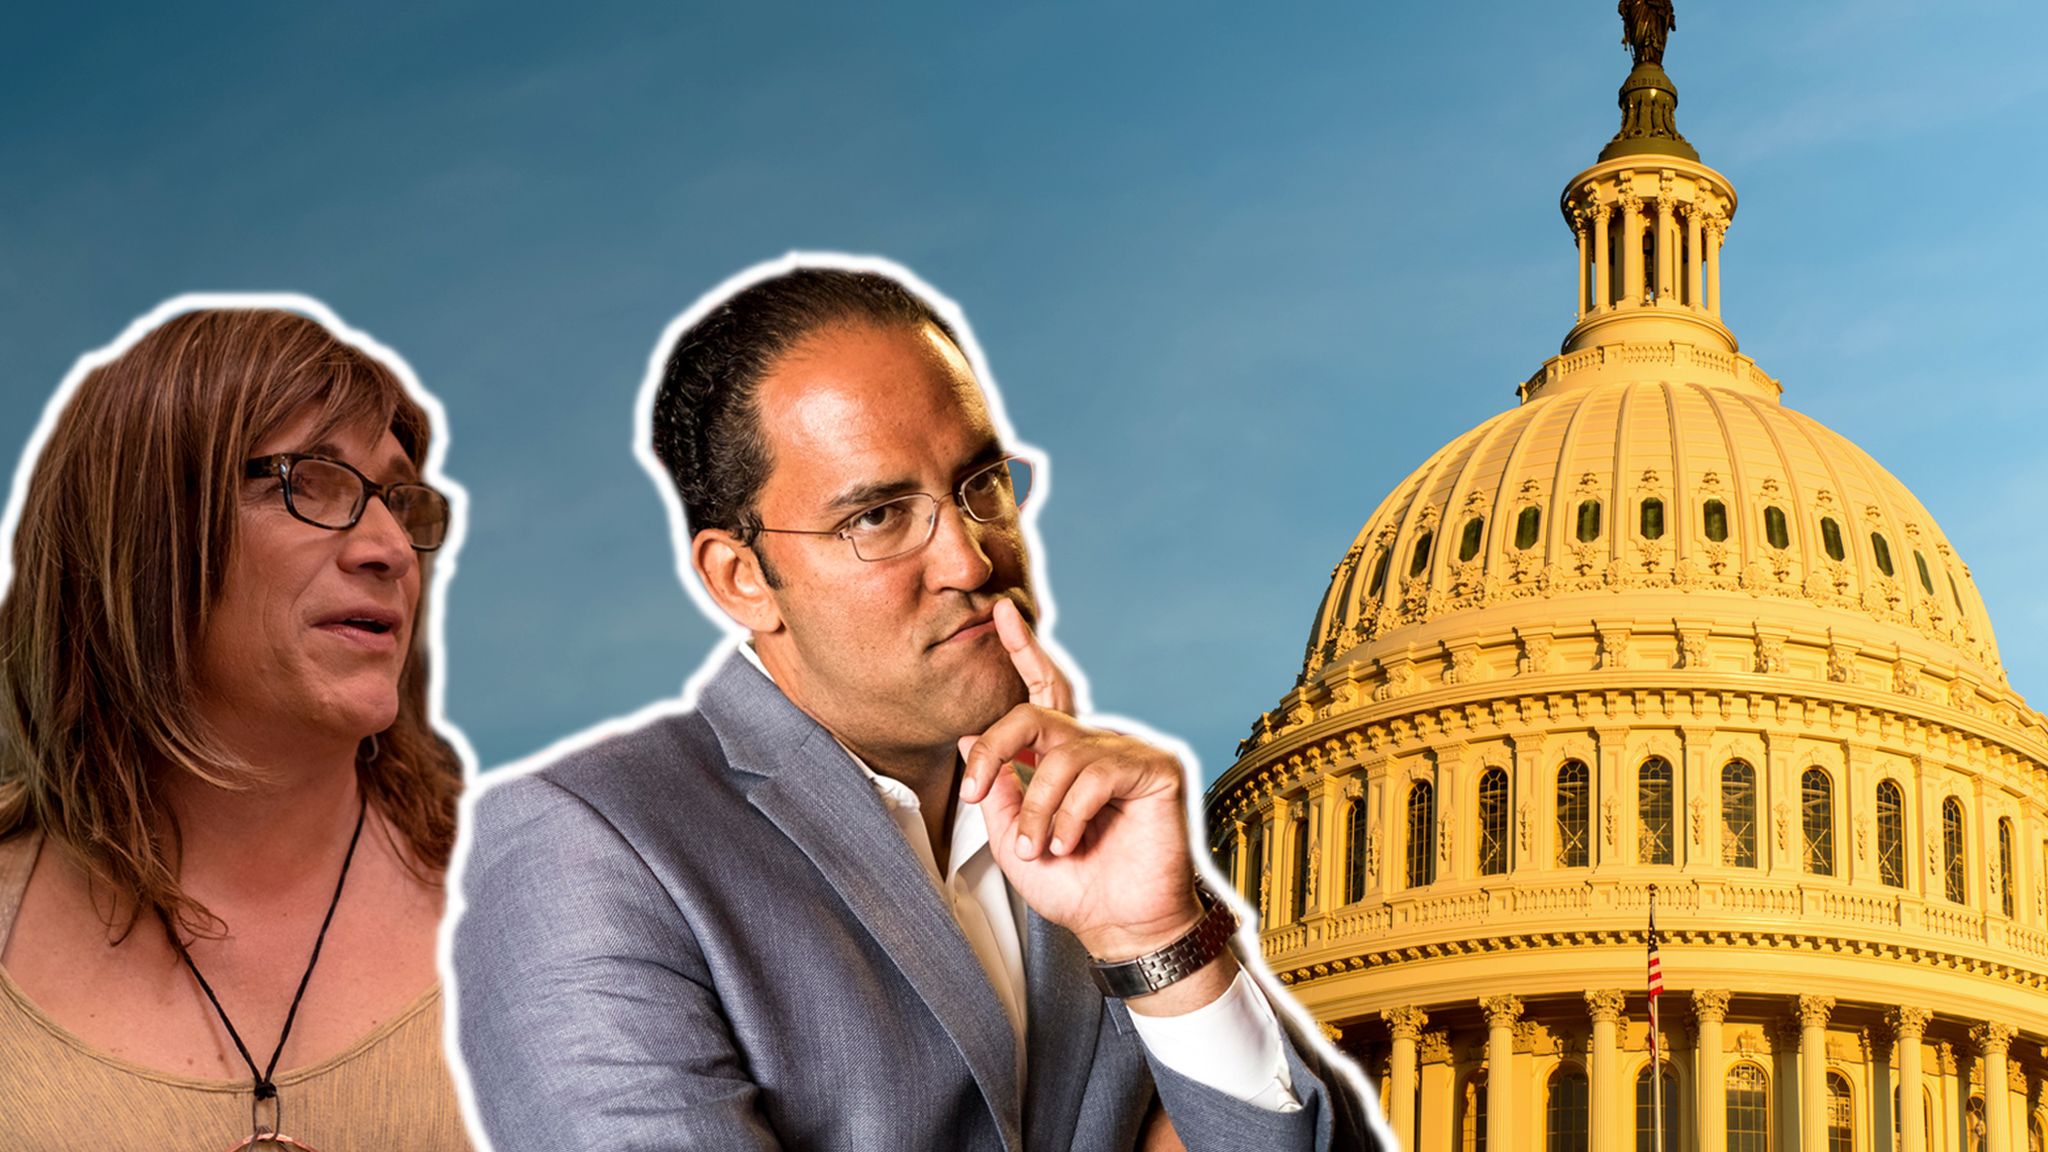 Composite image showing candidates Christine Hallquist and Will Hurd in front of the Capitol building